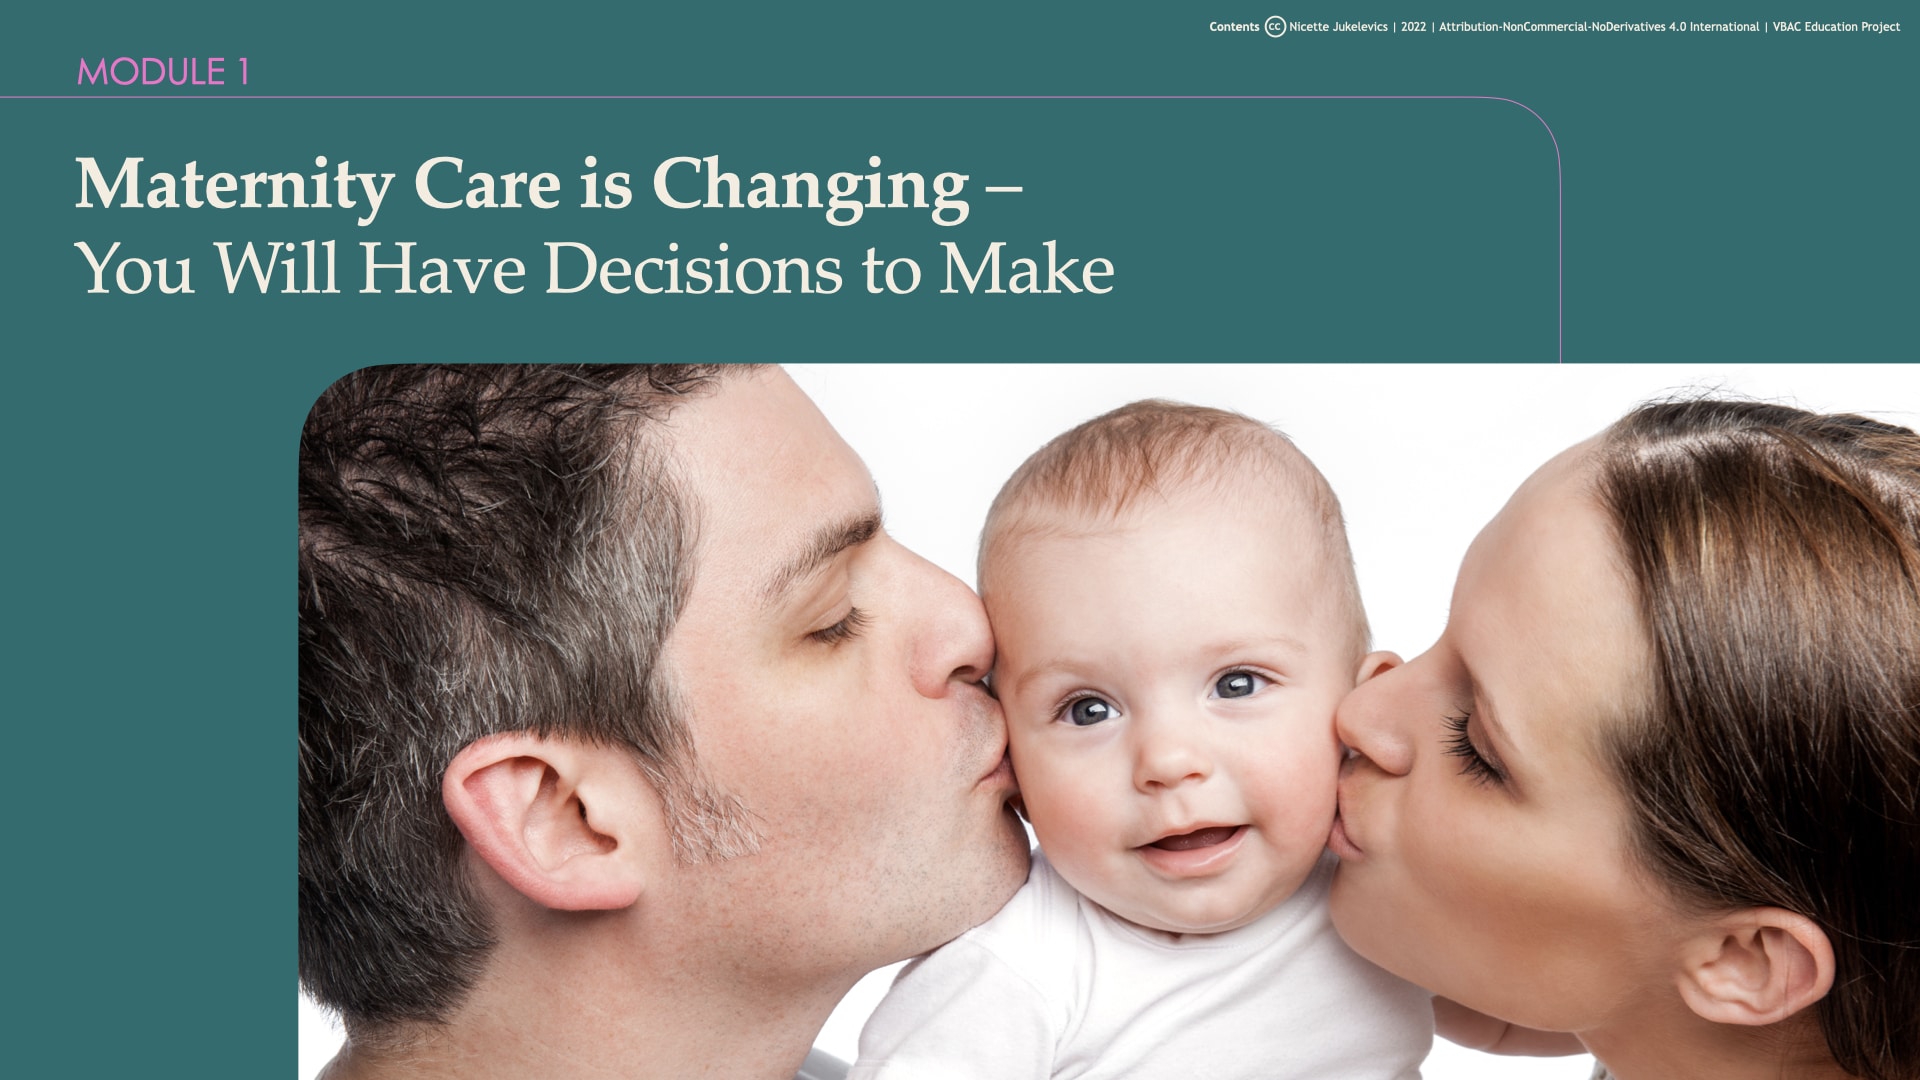 Module 1: Maternity Care is Changing – You Will Have Decisions to Make